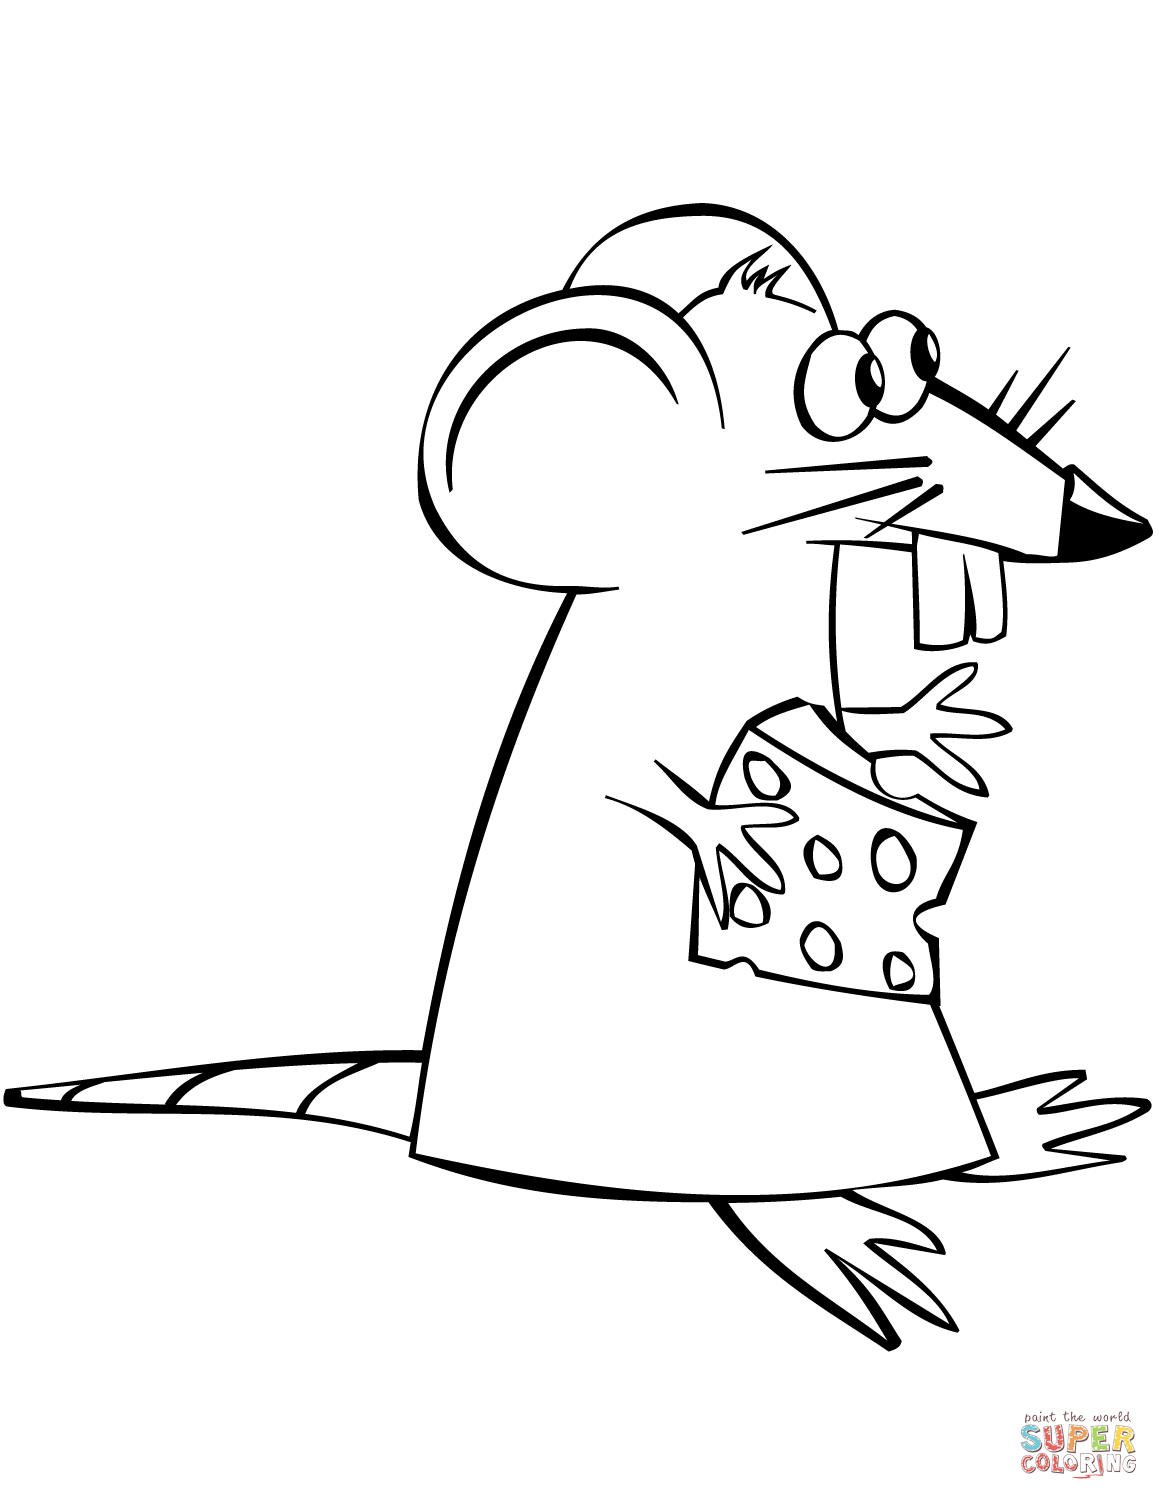 Cartoon mouse with cheese coloring page free printable coloring pages